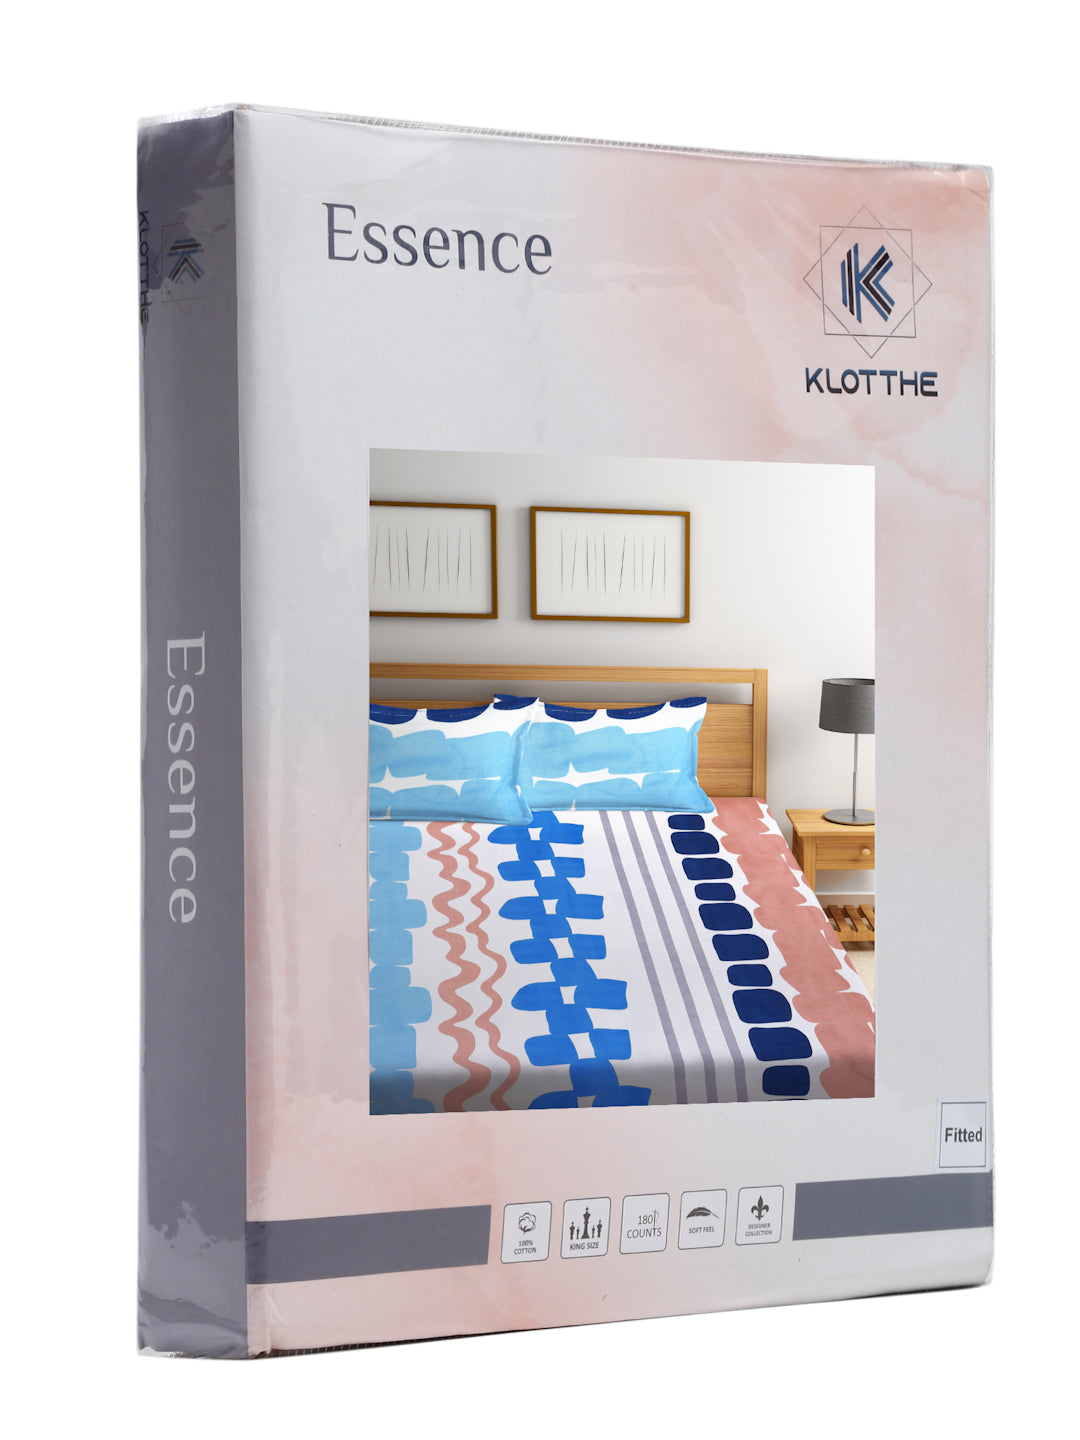 Klotthe Multi Abstract 300 TC Cotton Blend Double Bedsheet Set in Book Fold Packing